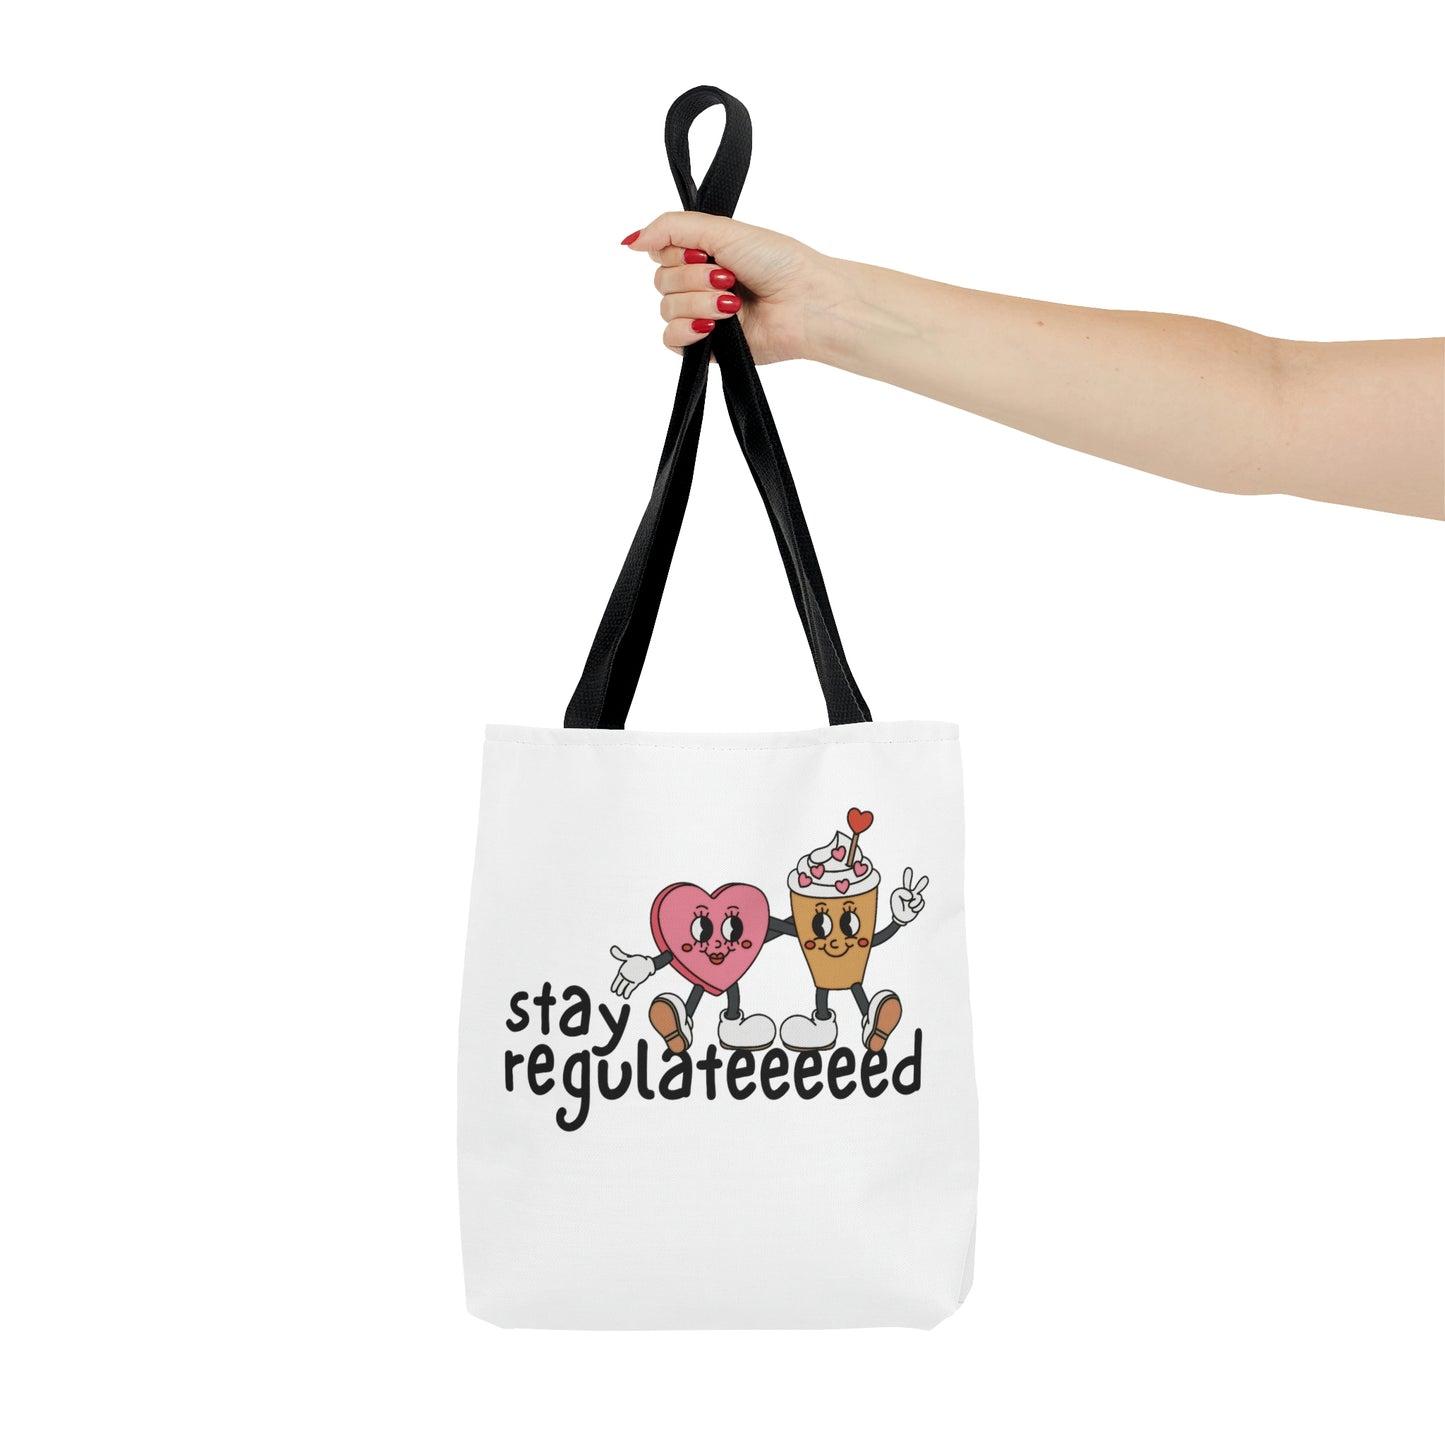 Stay Regulated Tote Bag in 3 sizes